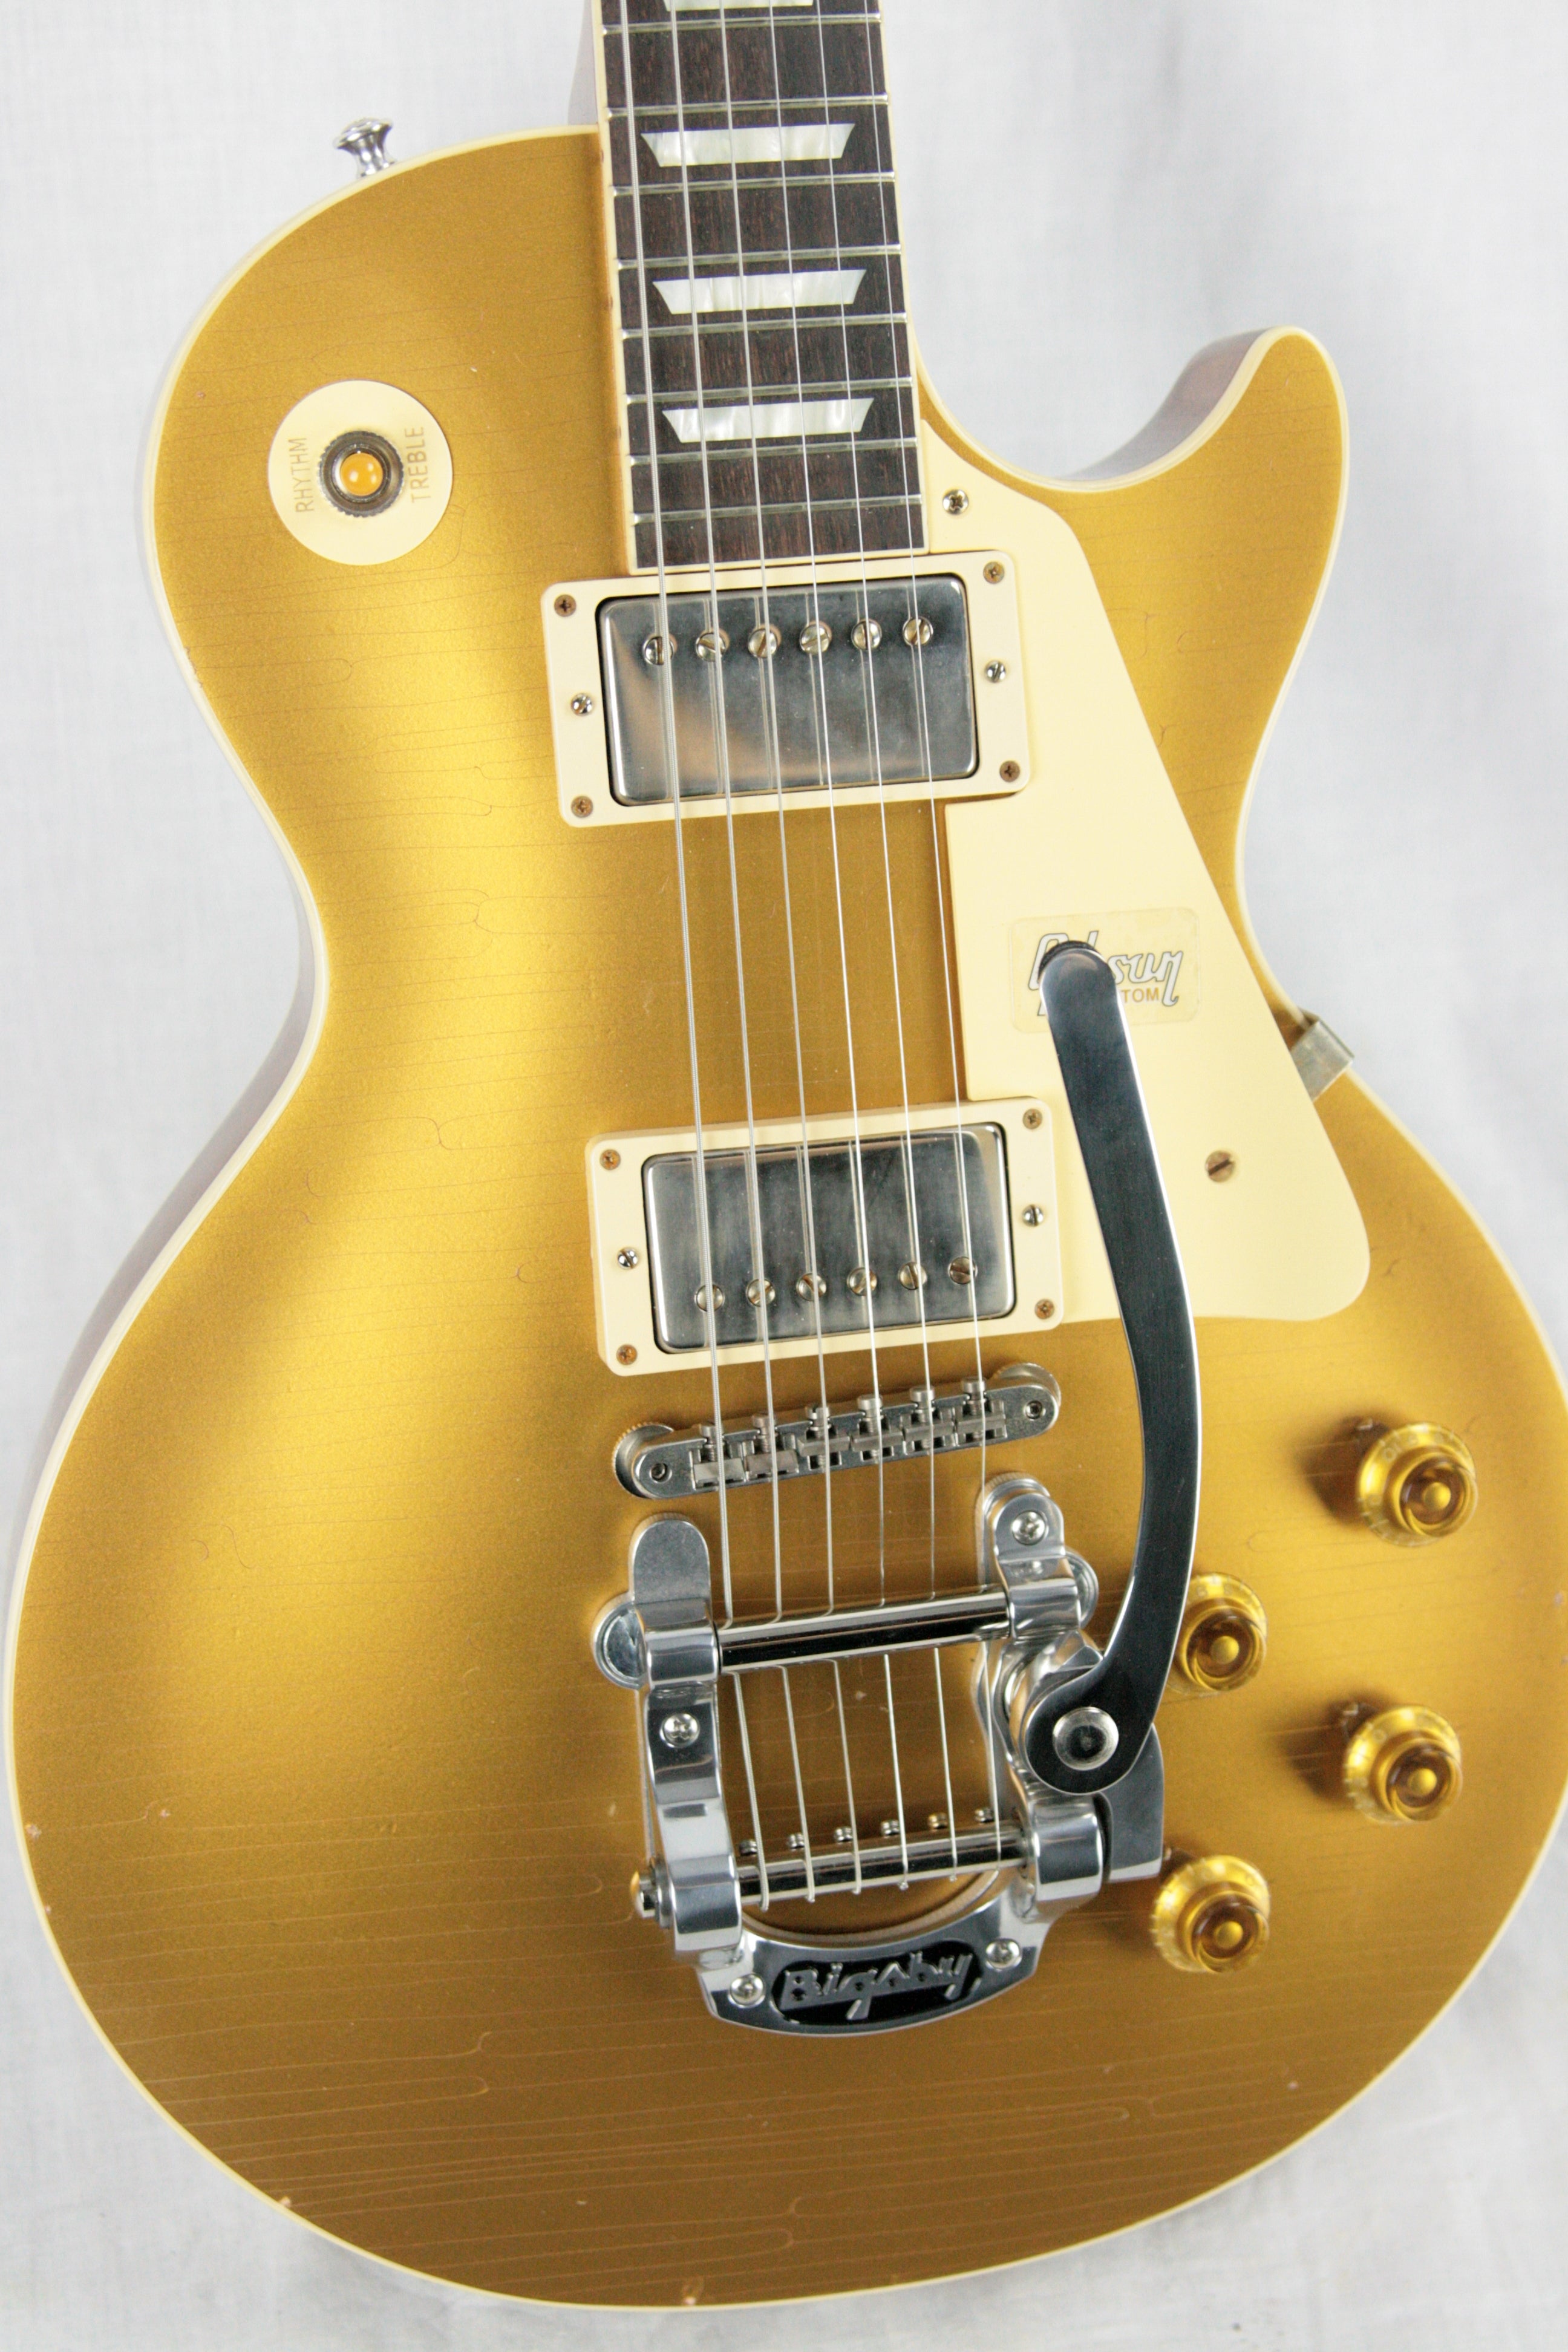 *SOLD*  2018 Gibson 1957 AGED Goldtop Les Paul Historic Reissue! R7 57 Bigsby! Custom Shop TH Specs!